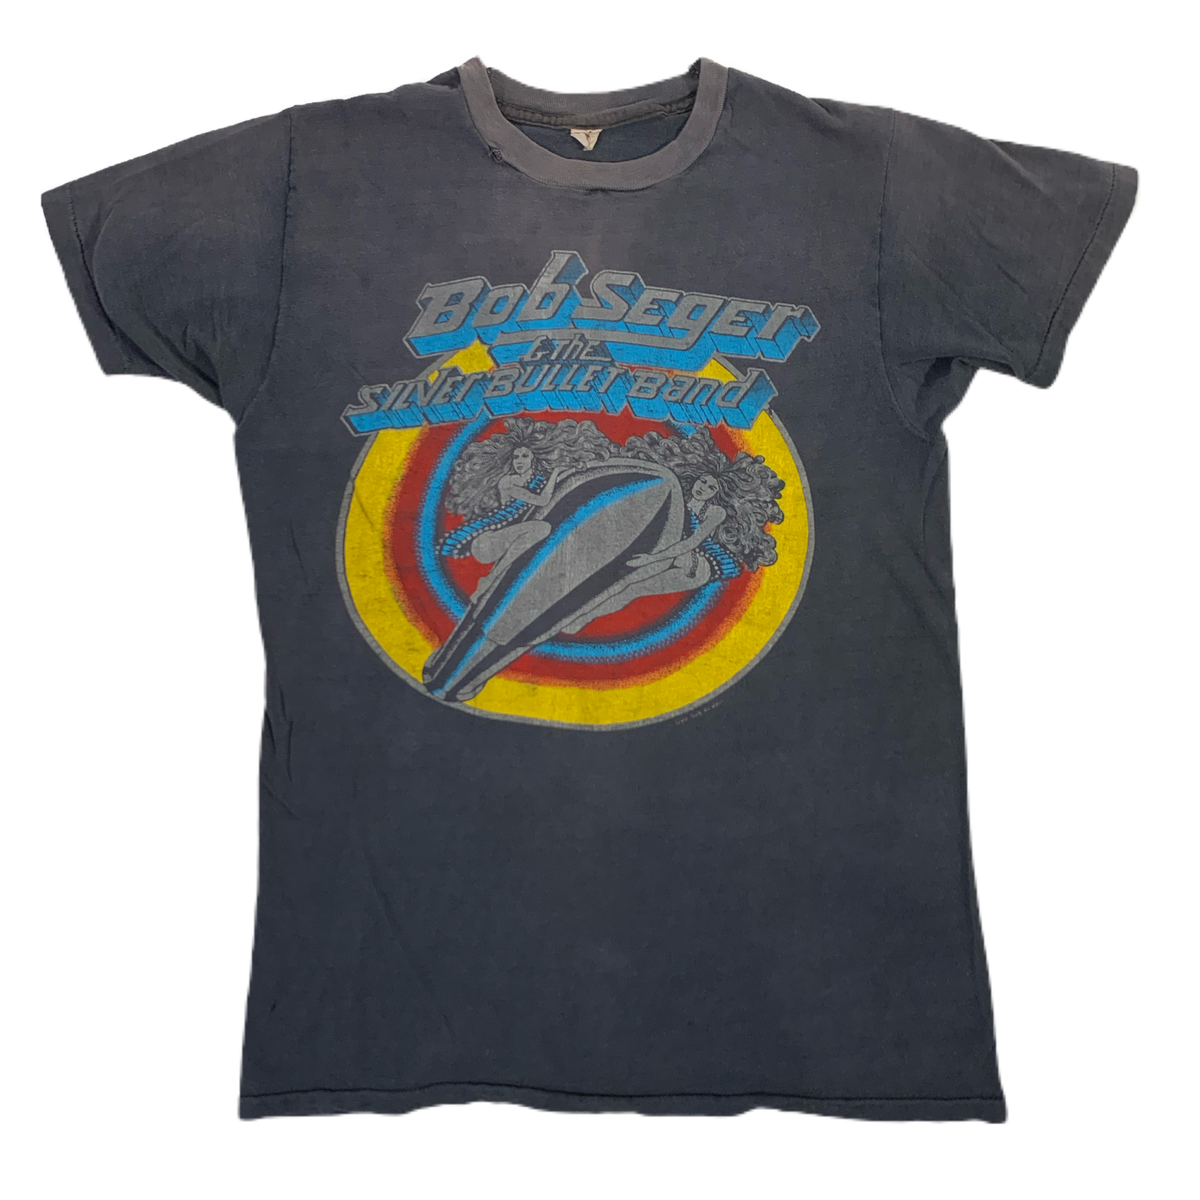 Vintage Bob Seger &amp; The Silver Buller Band “Touring Against The Wind” T-Shirt - jointcustodydc